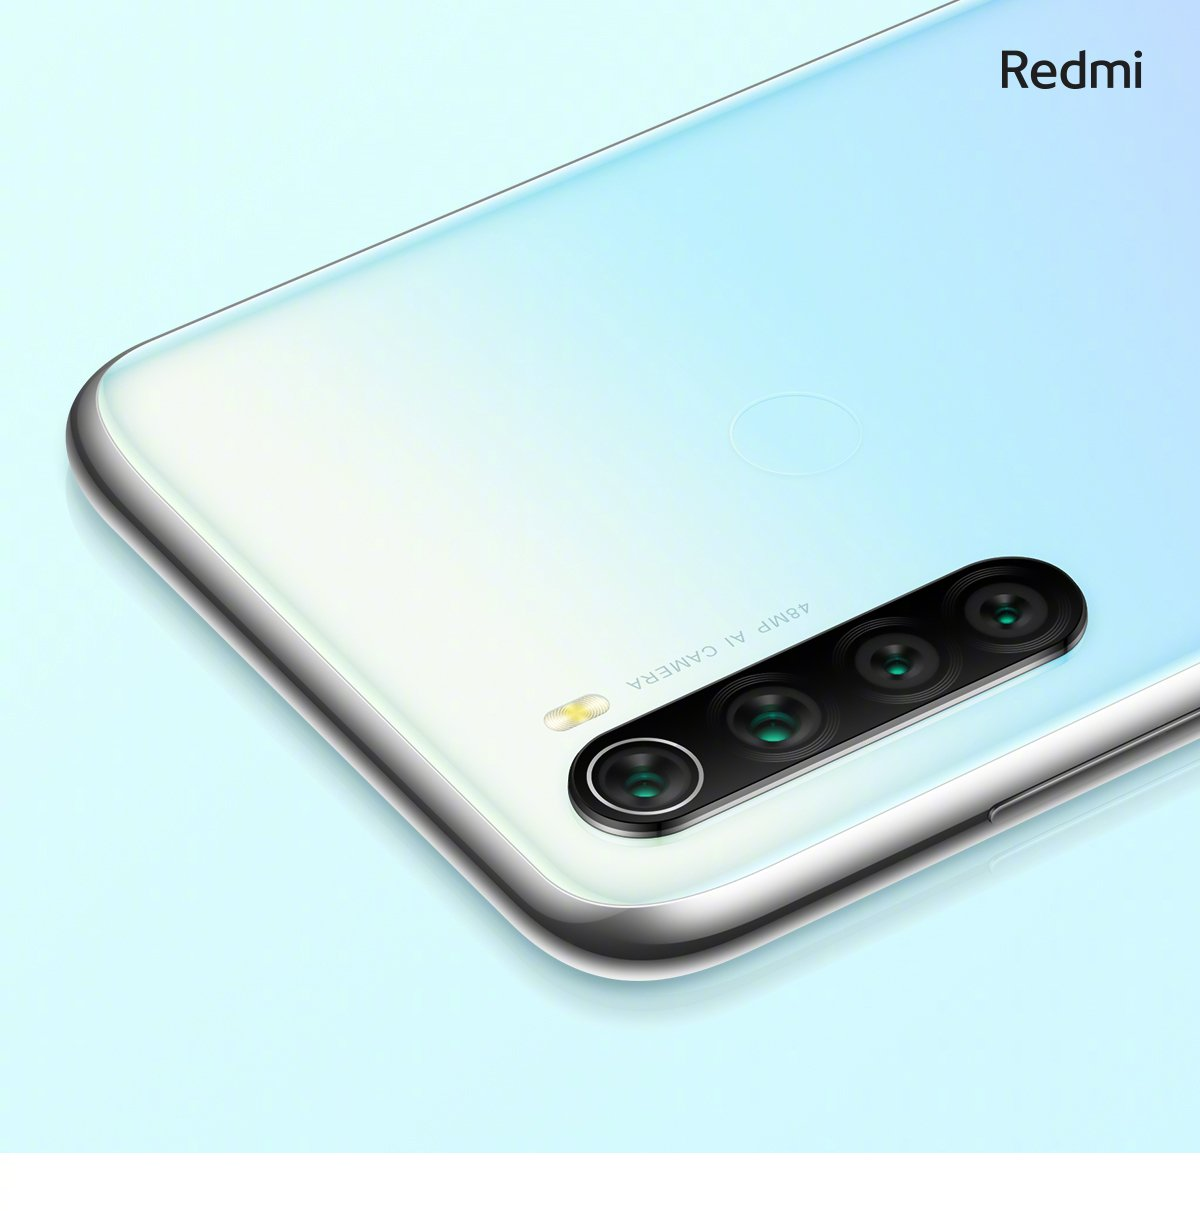 Xiaomi Redmi Note 8 key specifications revealed, to feature 48MP camera